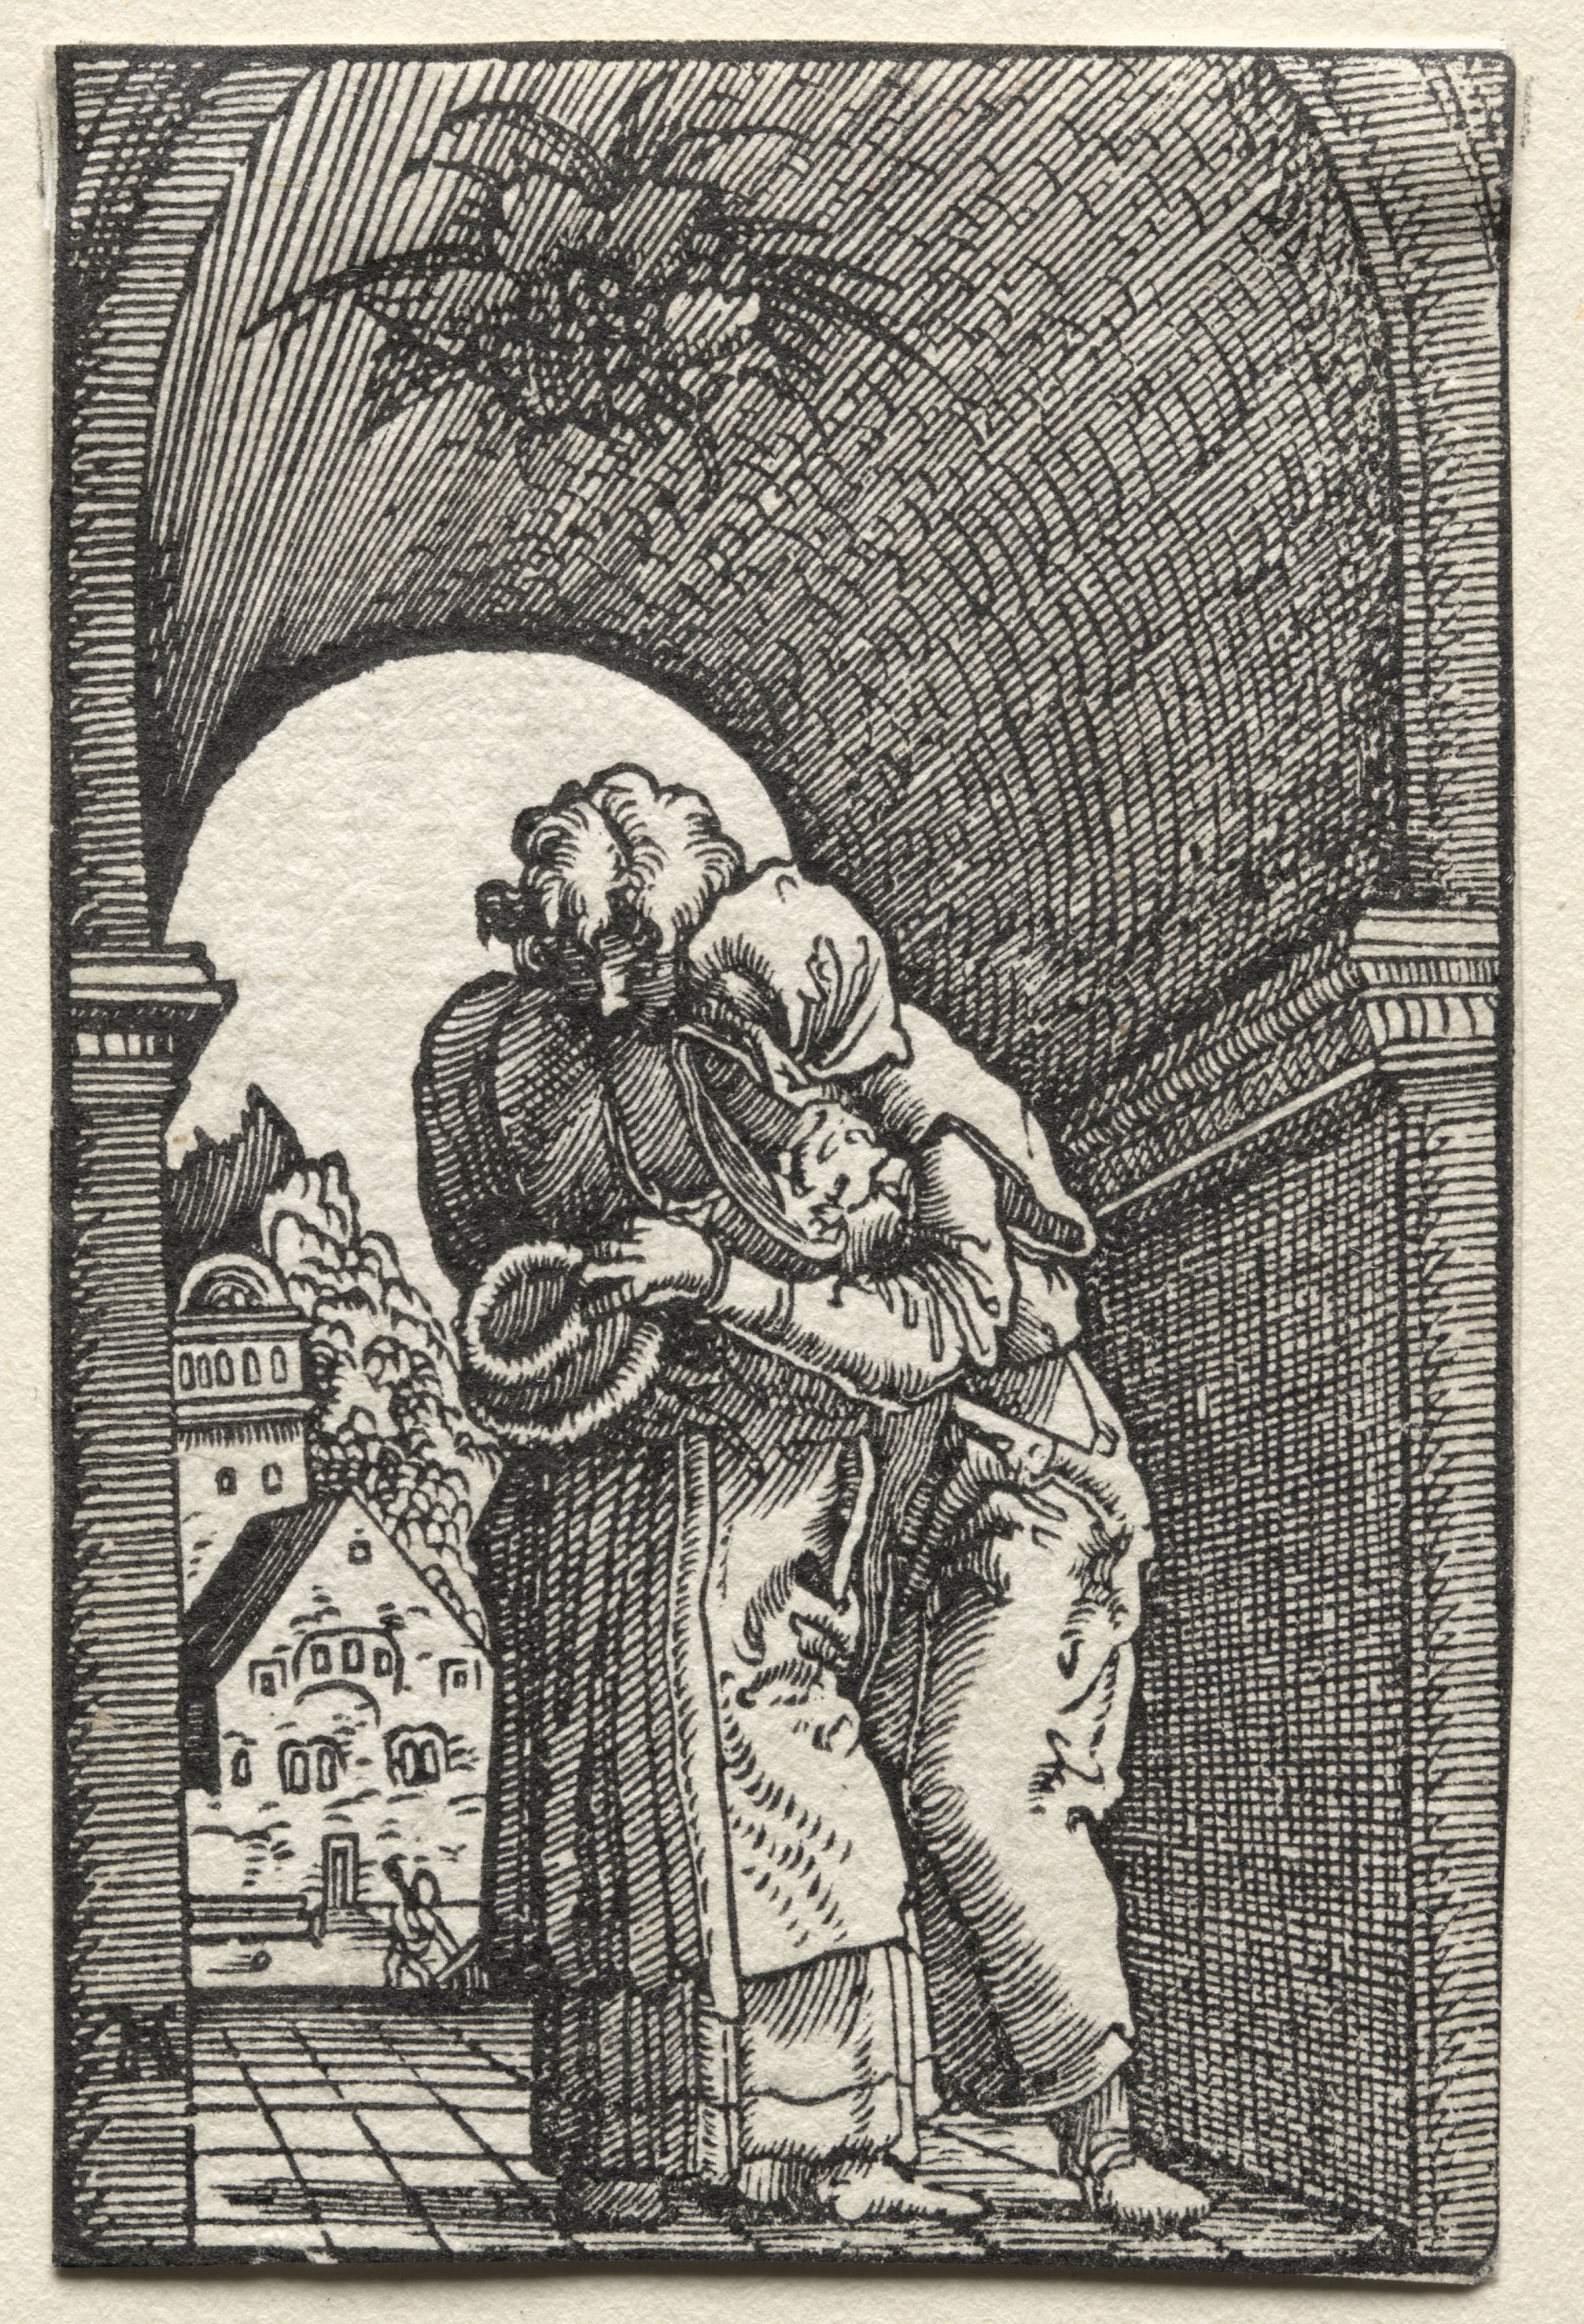 The Fall and Redemption of Man:  The Embrace of Joachim and Anne at the Golden Gate